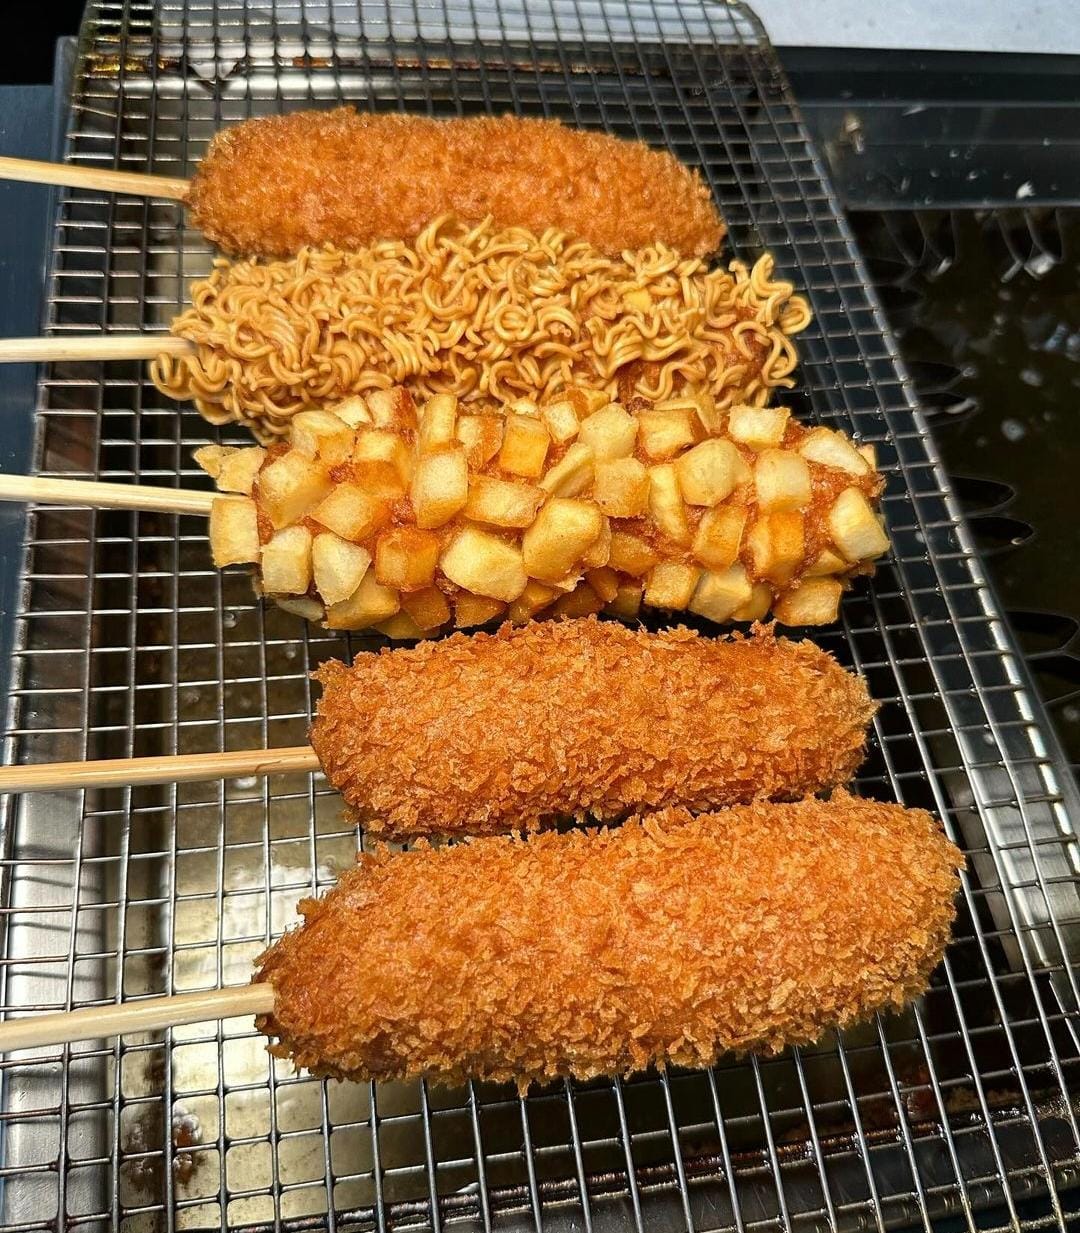 5 Korean Corn Dogs on the grill